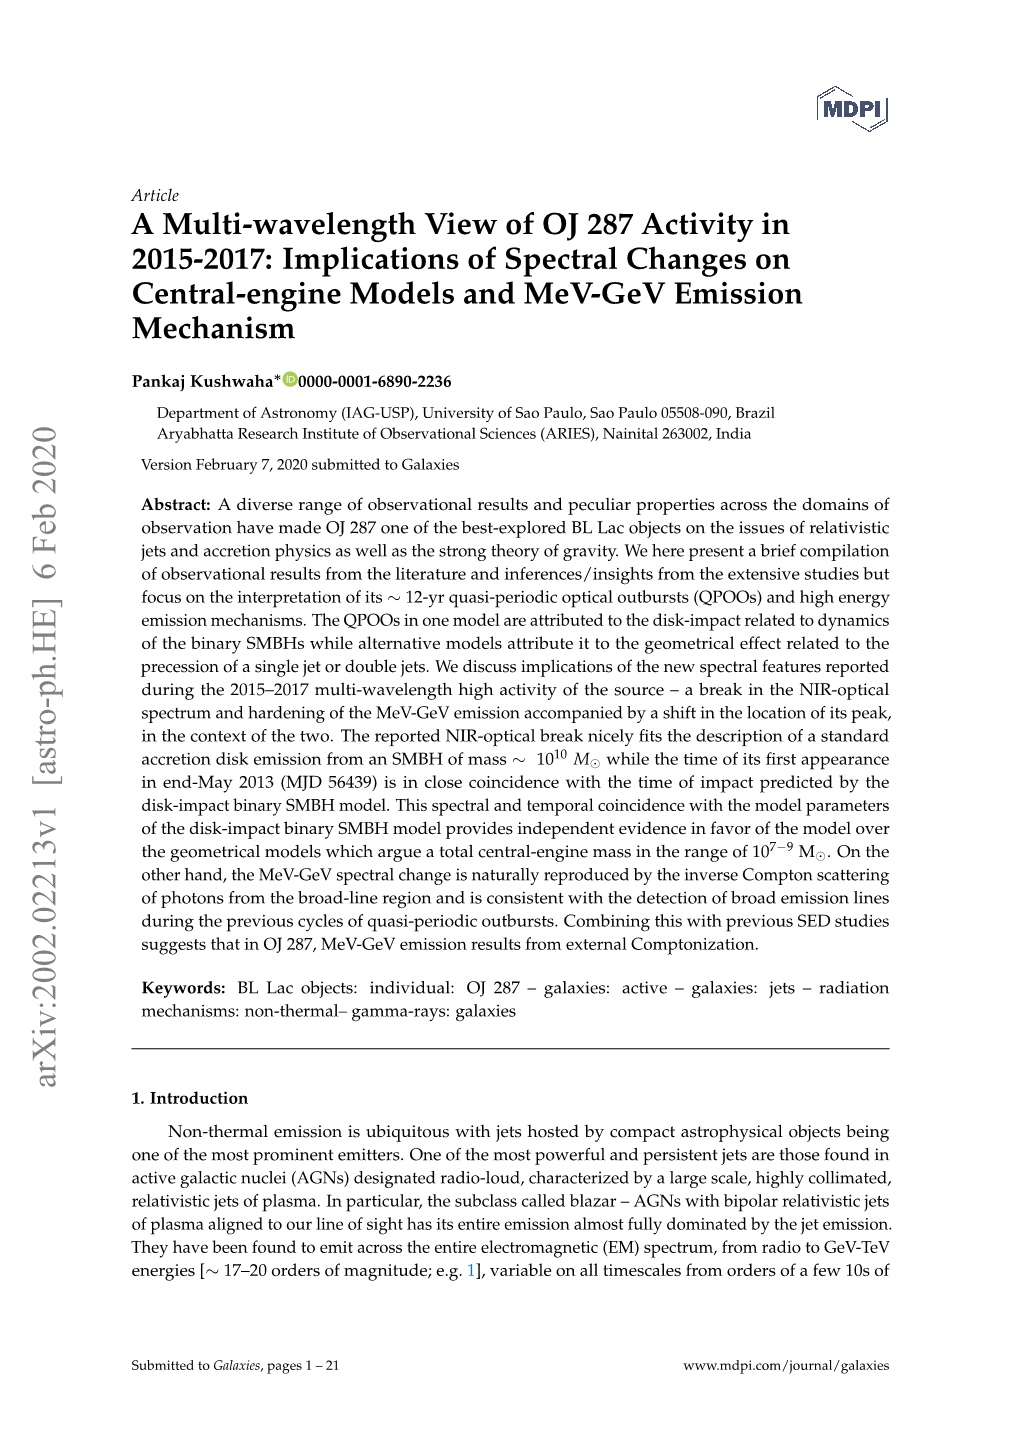 A Multi-Wavelength View of OJ 287 Activity in 2015-2017: Implications of Spectral Changes on Central-Engine Models and Mev-Gev Emission Mechanism